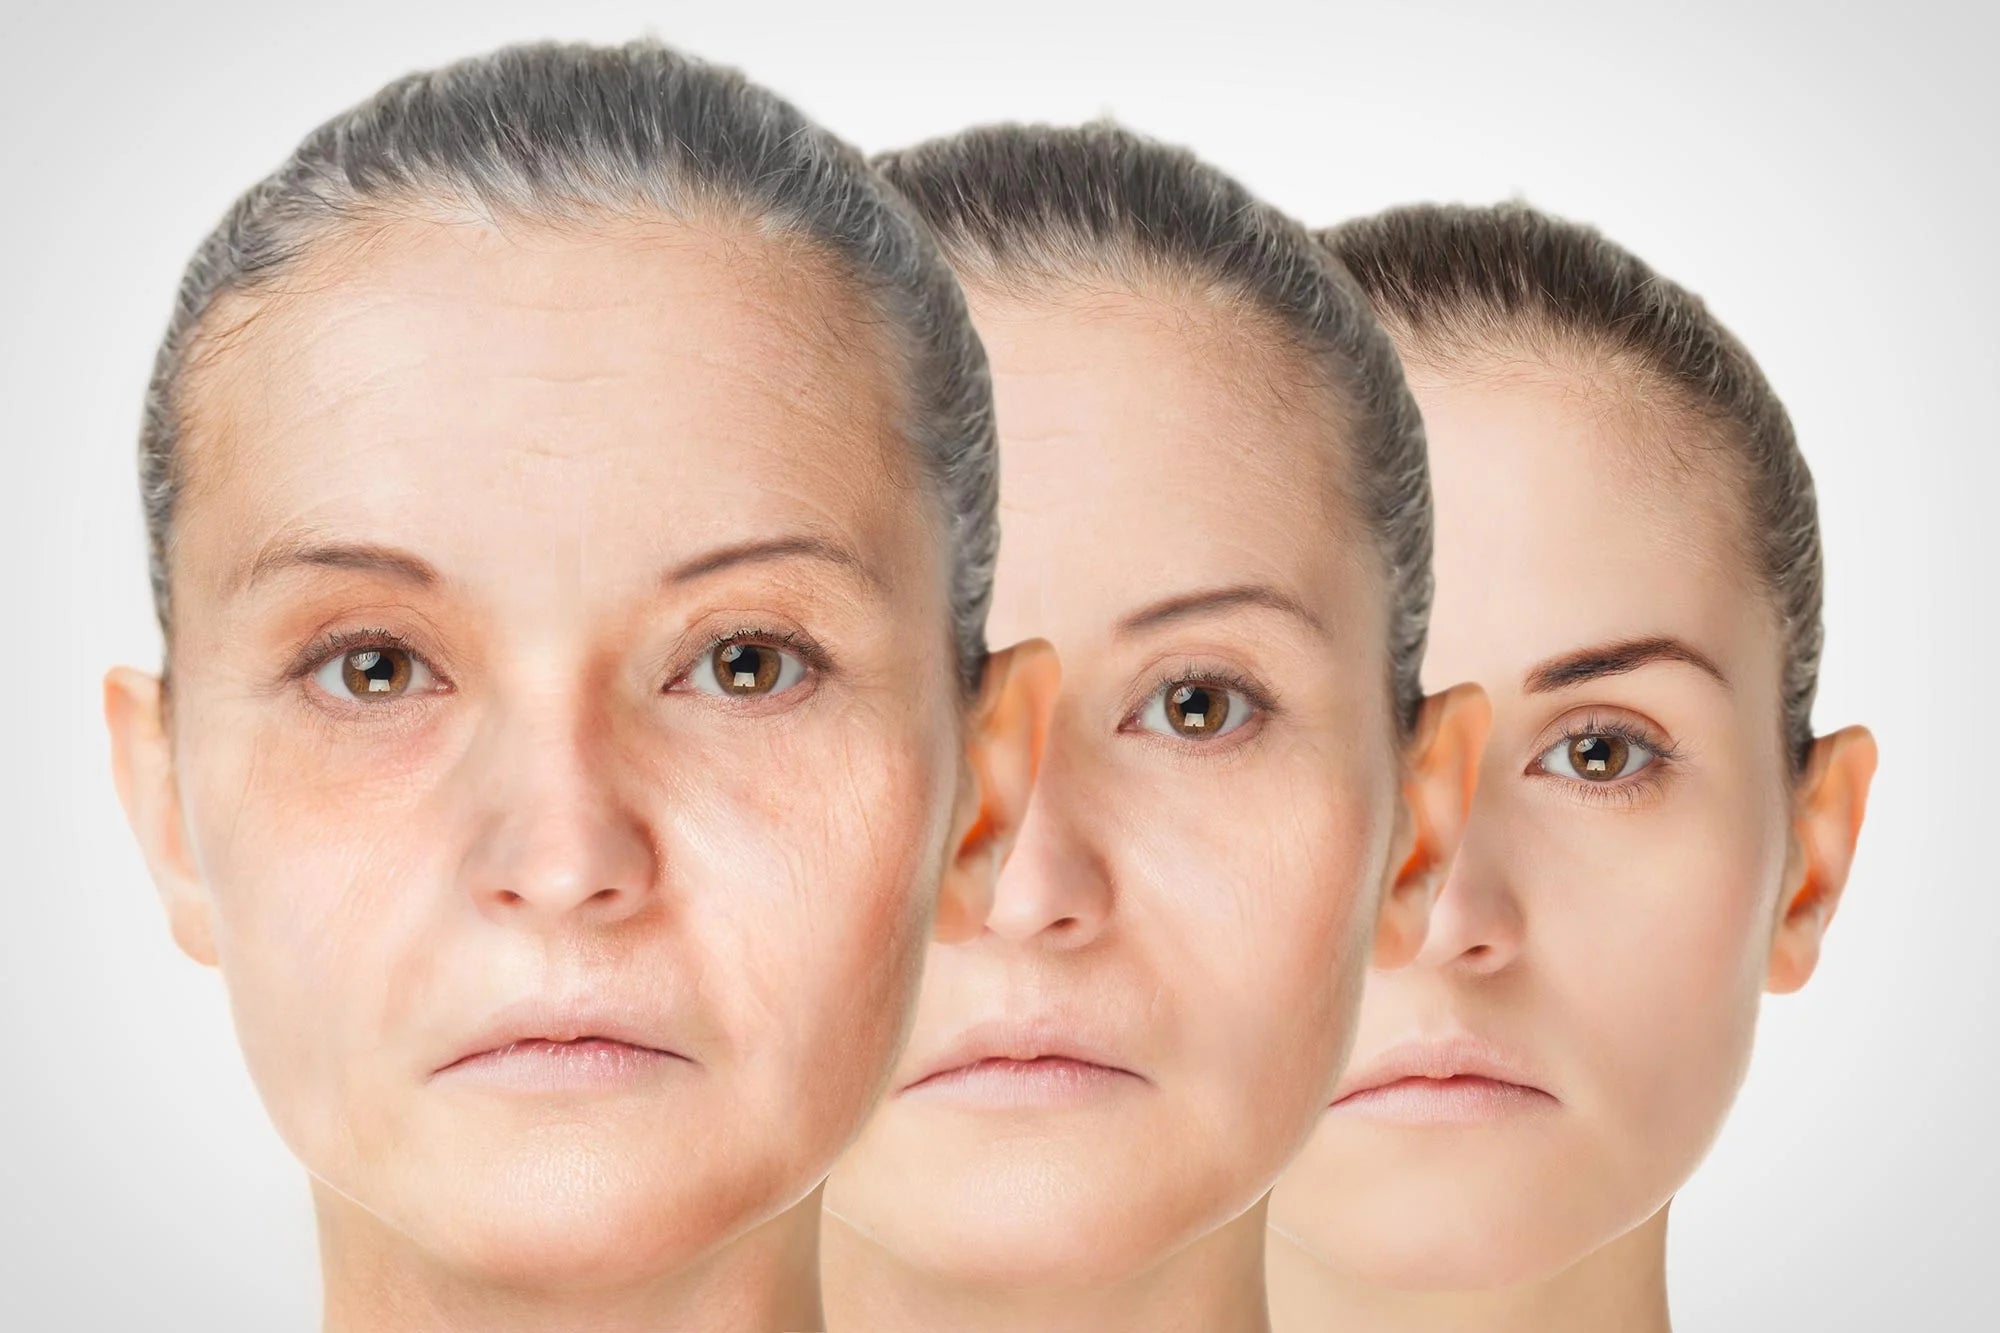 Exploring Breakthroughs in Anti-Aging Technology"